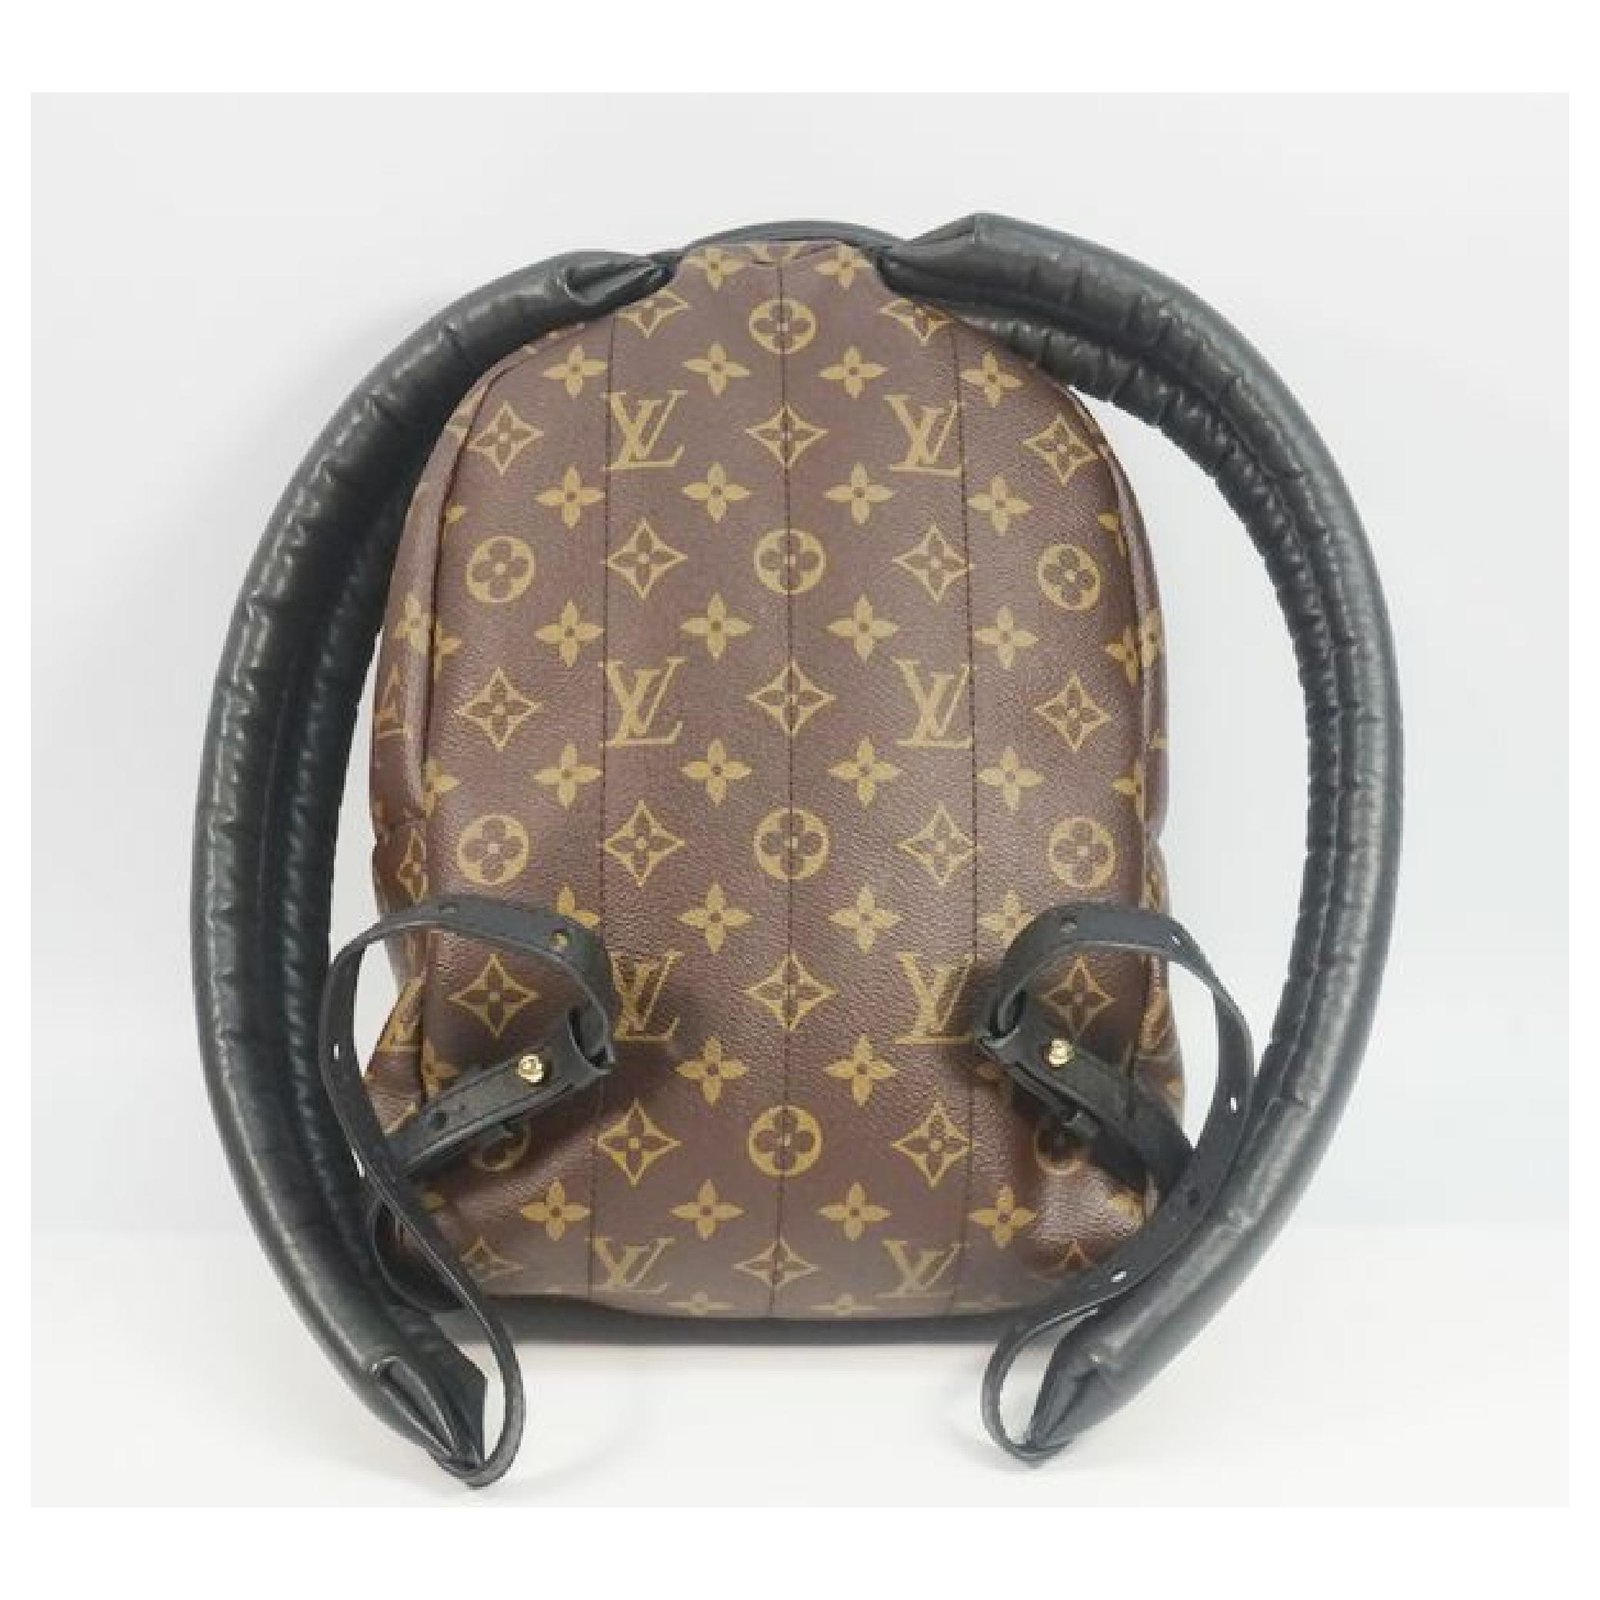 LOUIS VUITTON Palm Springs Backpack PM Womens ruck sack Daypack